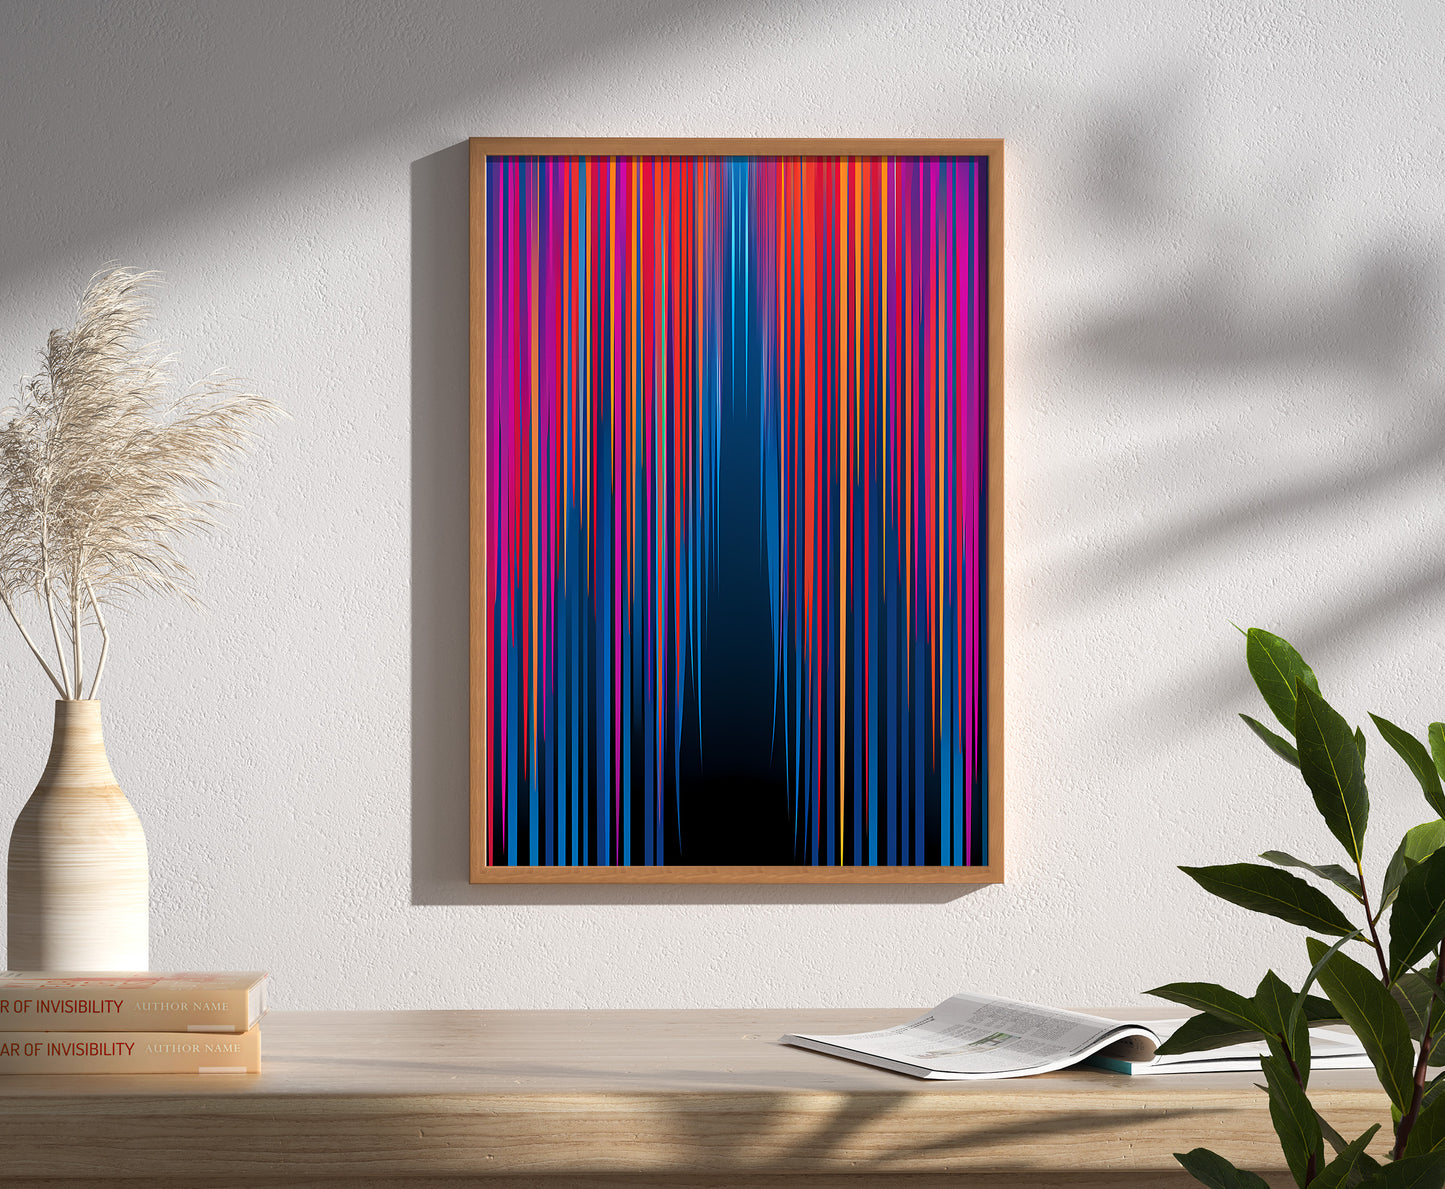 A colorful striped abstract art piece hanging on a wall above a houseplant and books.